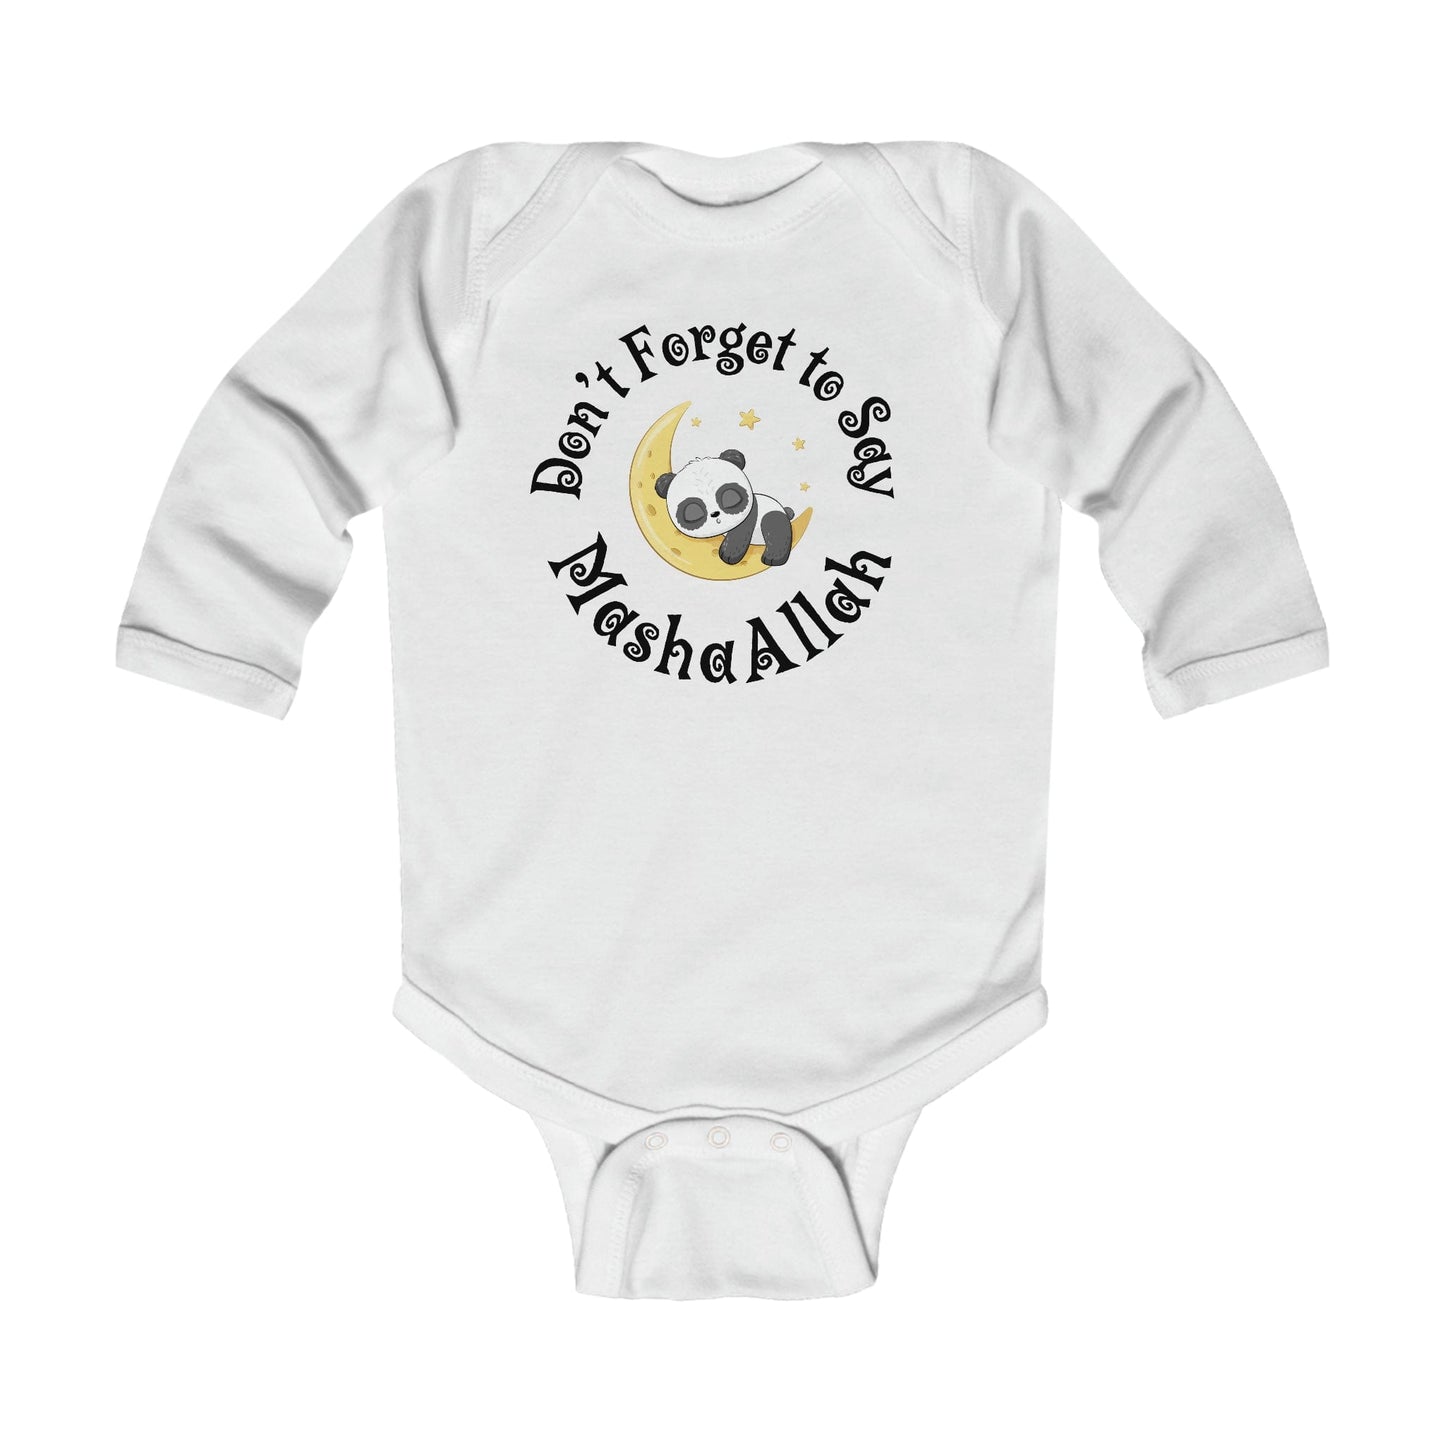 Don't Forget to Say MashaAllah Long Sleeve Baby Onesie